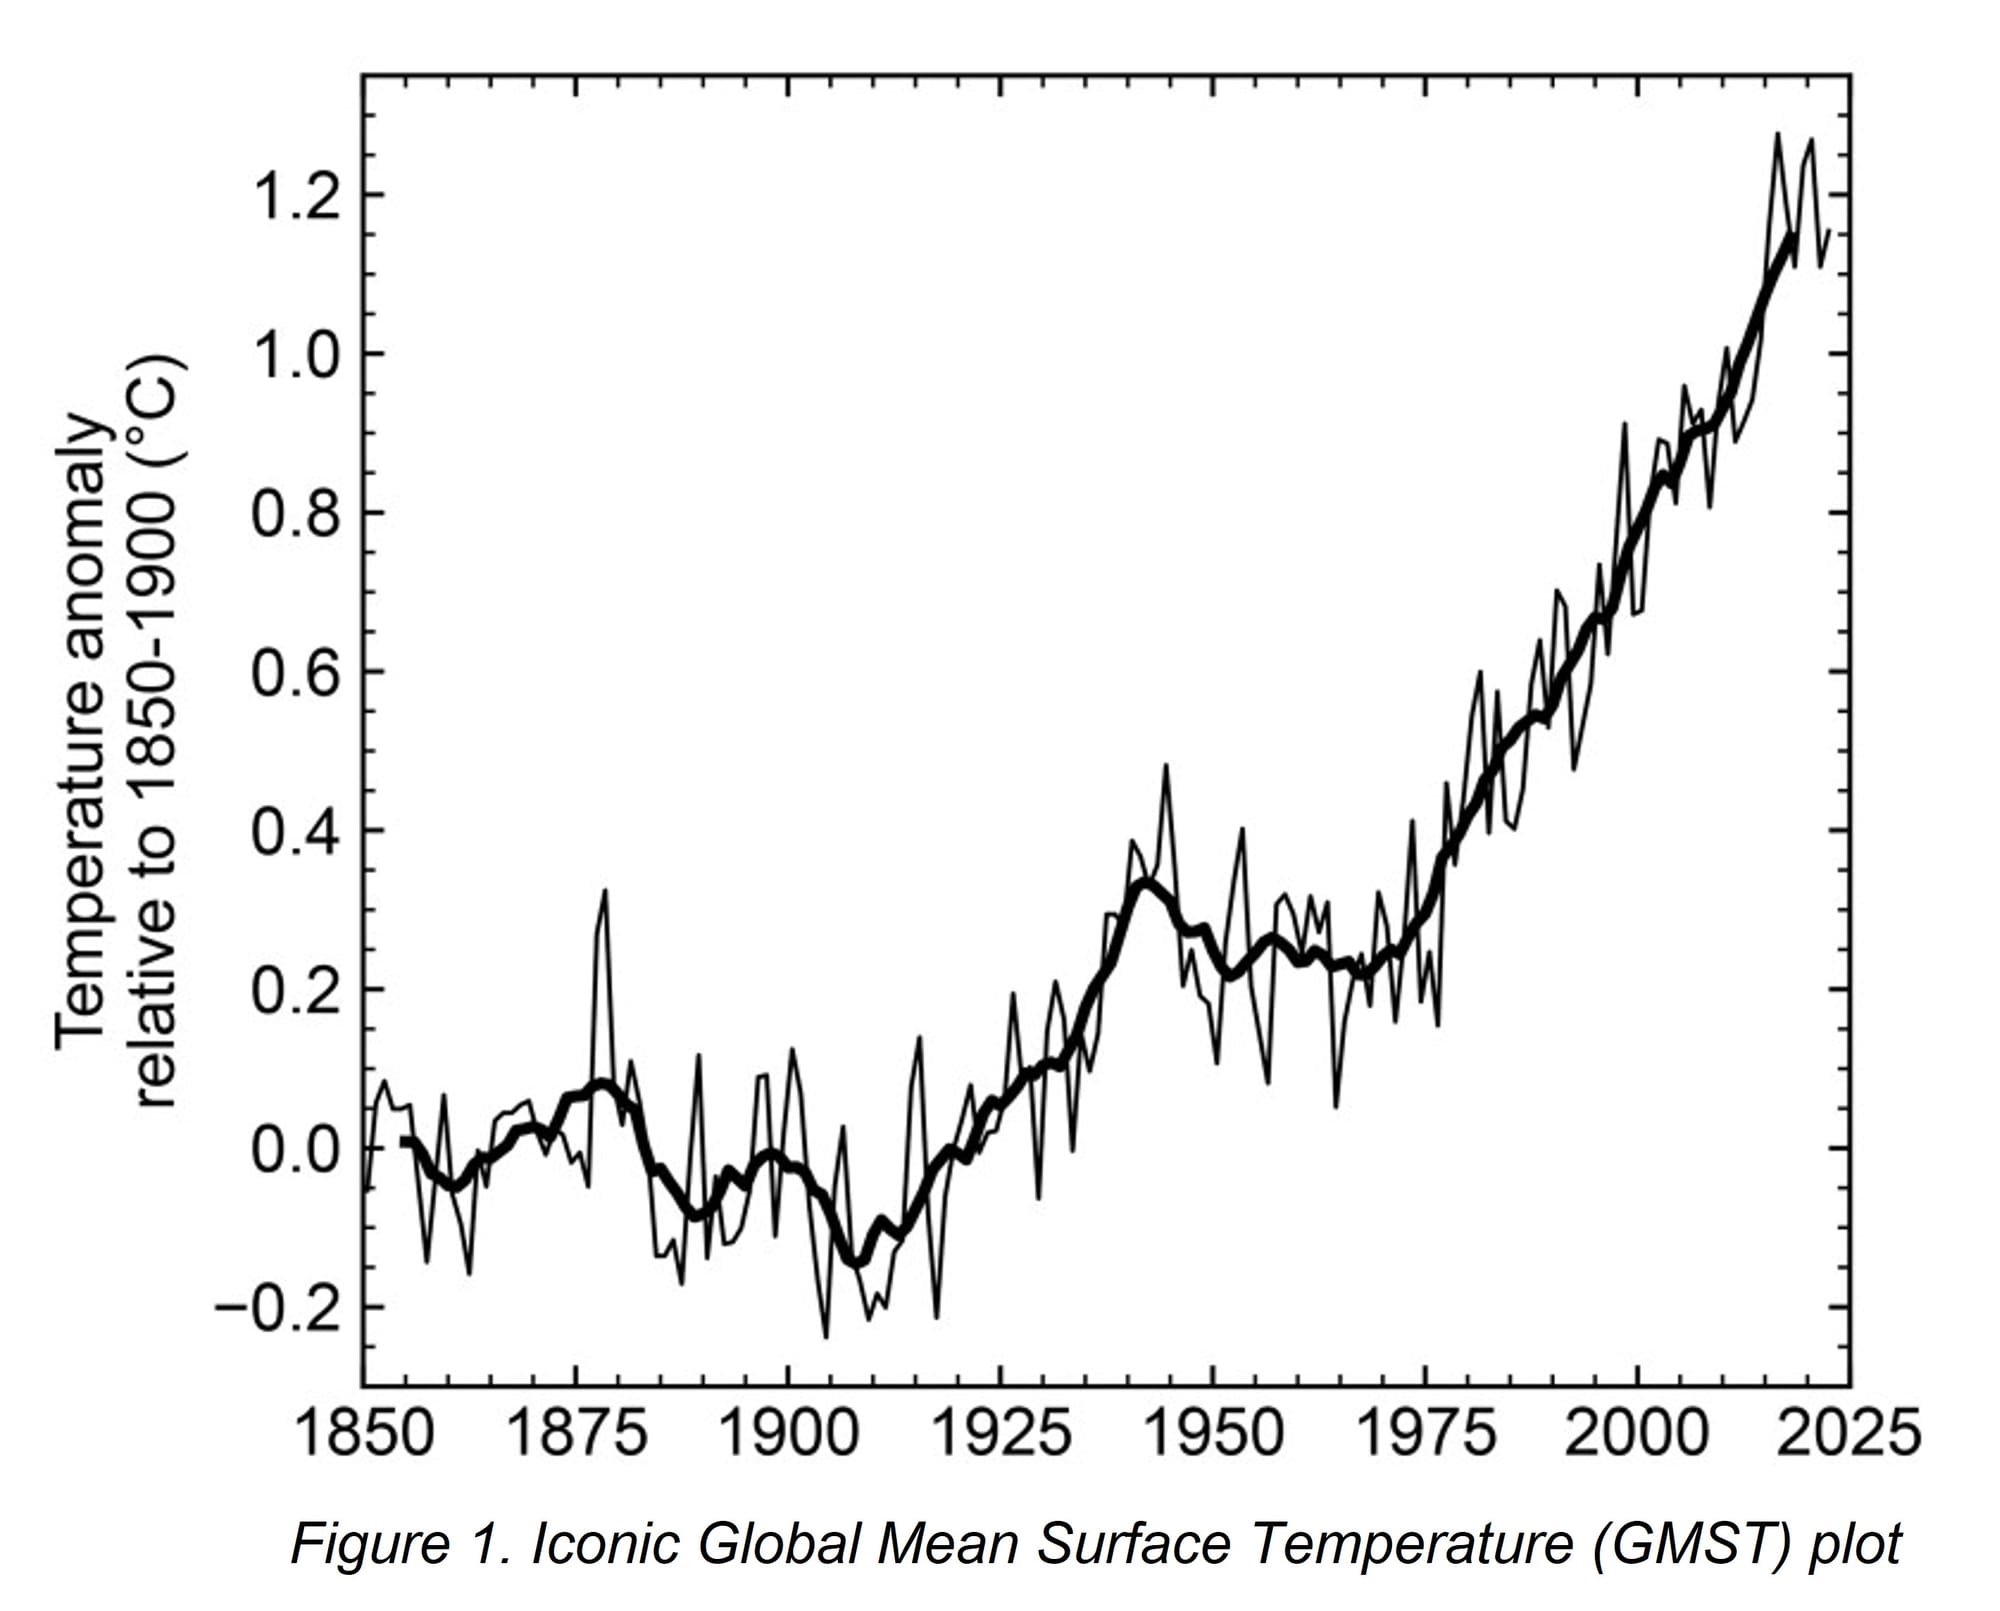 Does the focus on one iconic global temperature plot make sense?